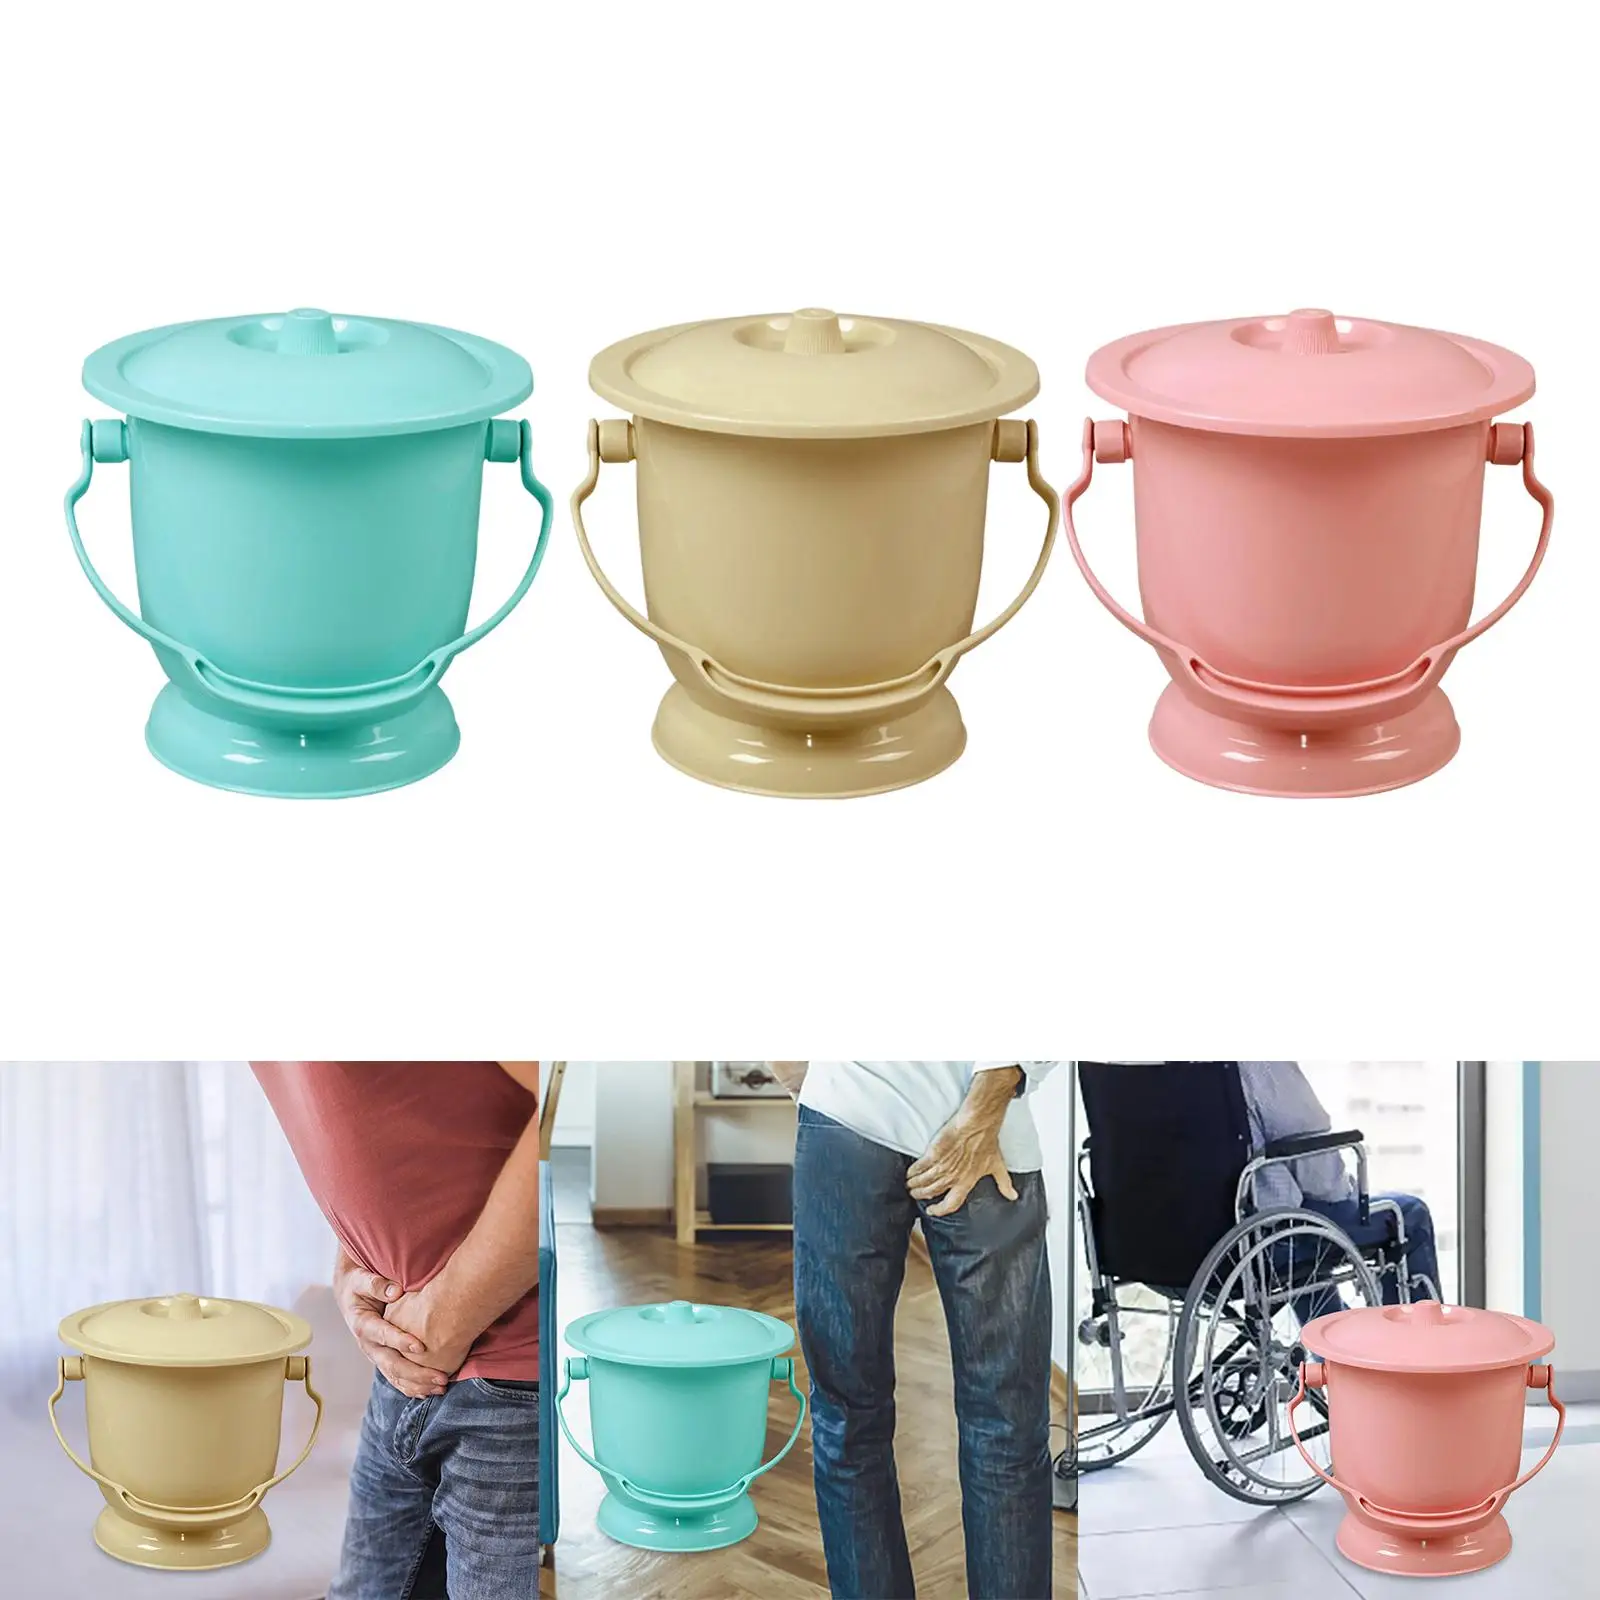 Chamber Pot with Lid Bedpan Spittoon Practical Mini Toilets Urine Bucket